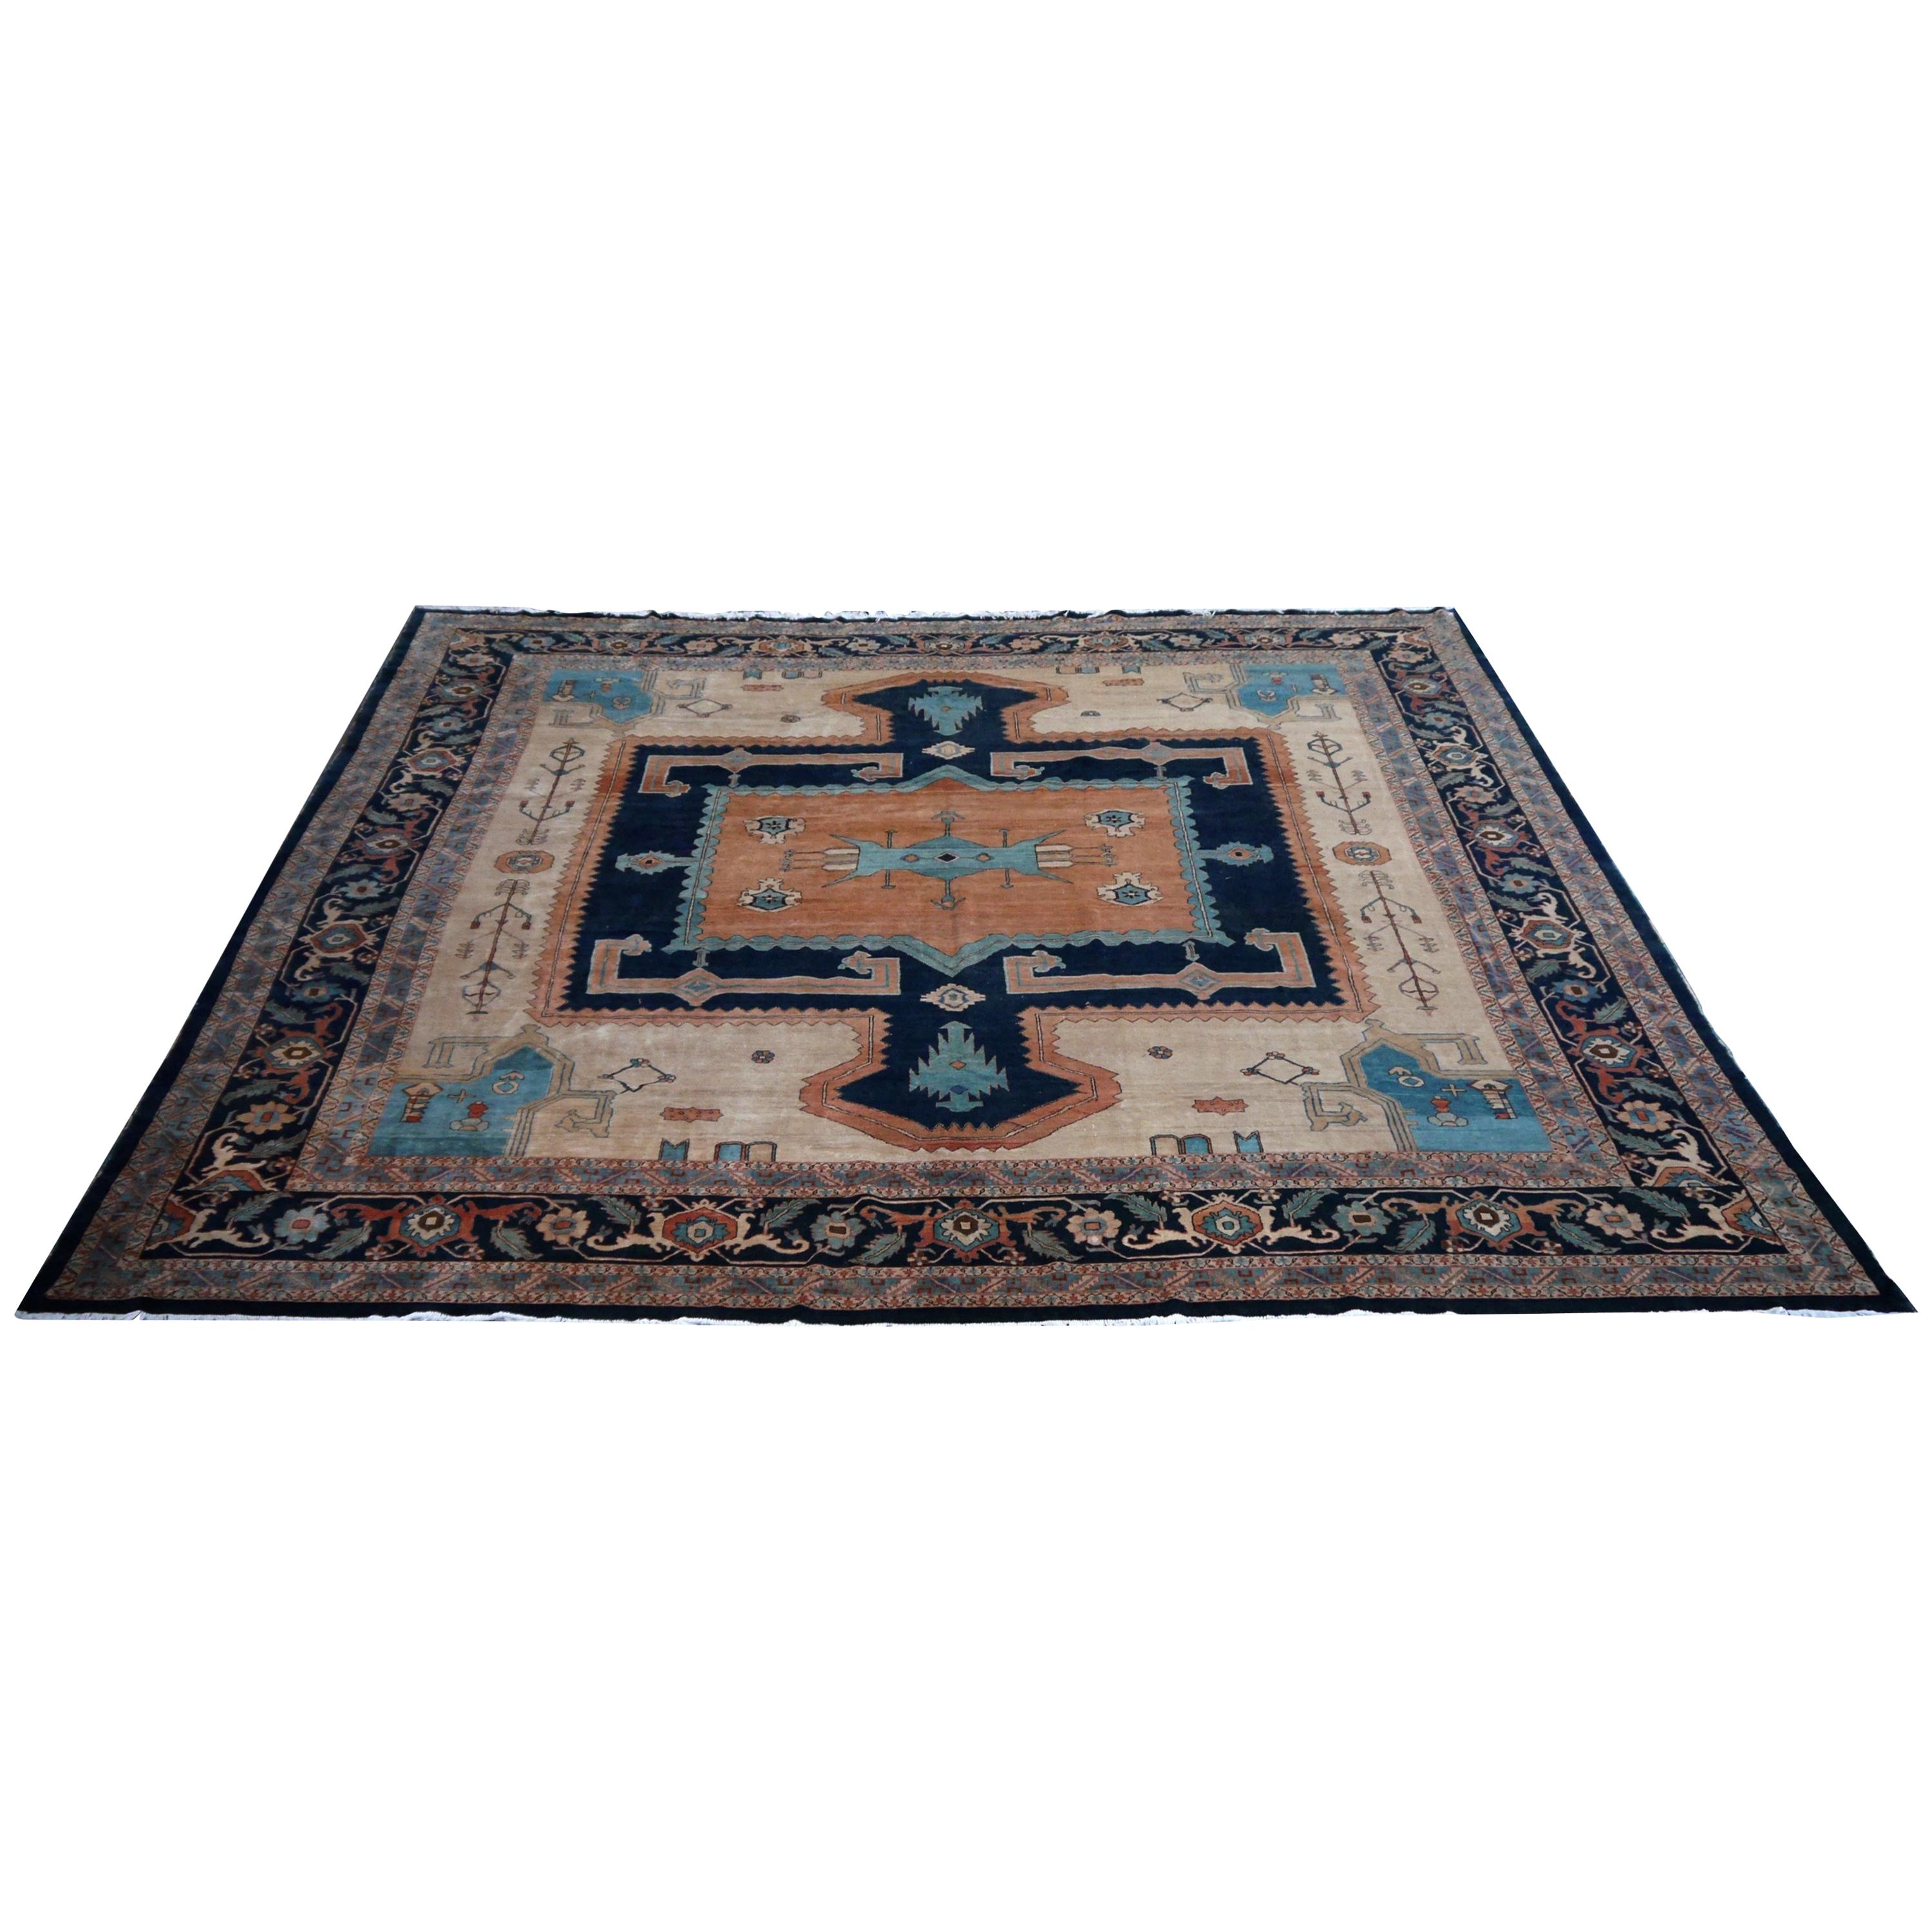 Azeri rug in Heriz style 

Size: 20 x 16 ft / 600 x 490 cm. 
Construction: Hand-knotted
Shape: Rectangular
Age: 4th Quarter 20th Century
Colors: Camel, Dark Blue, Light Blue, Cinnamon
Pile: Wool
Condition: Very good
Style: Traditional, Transitional,